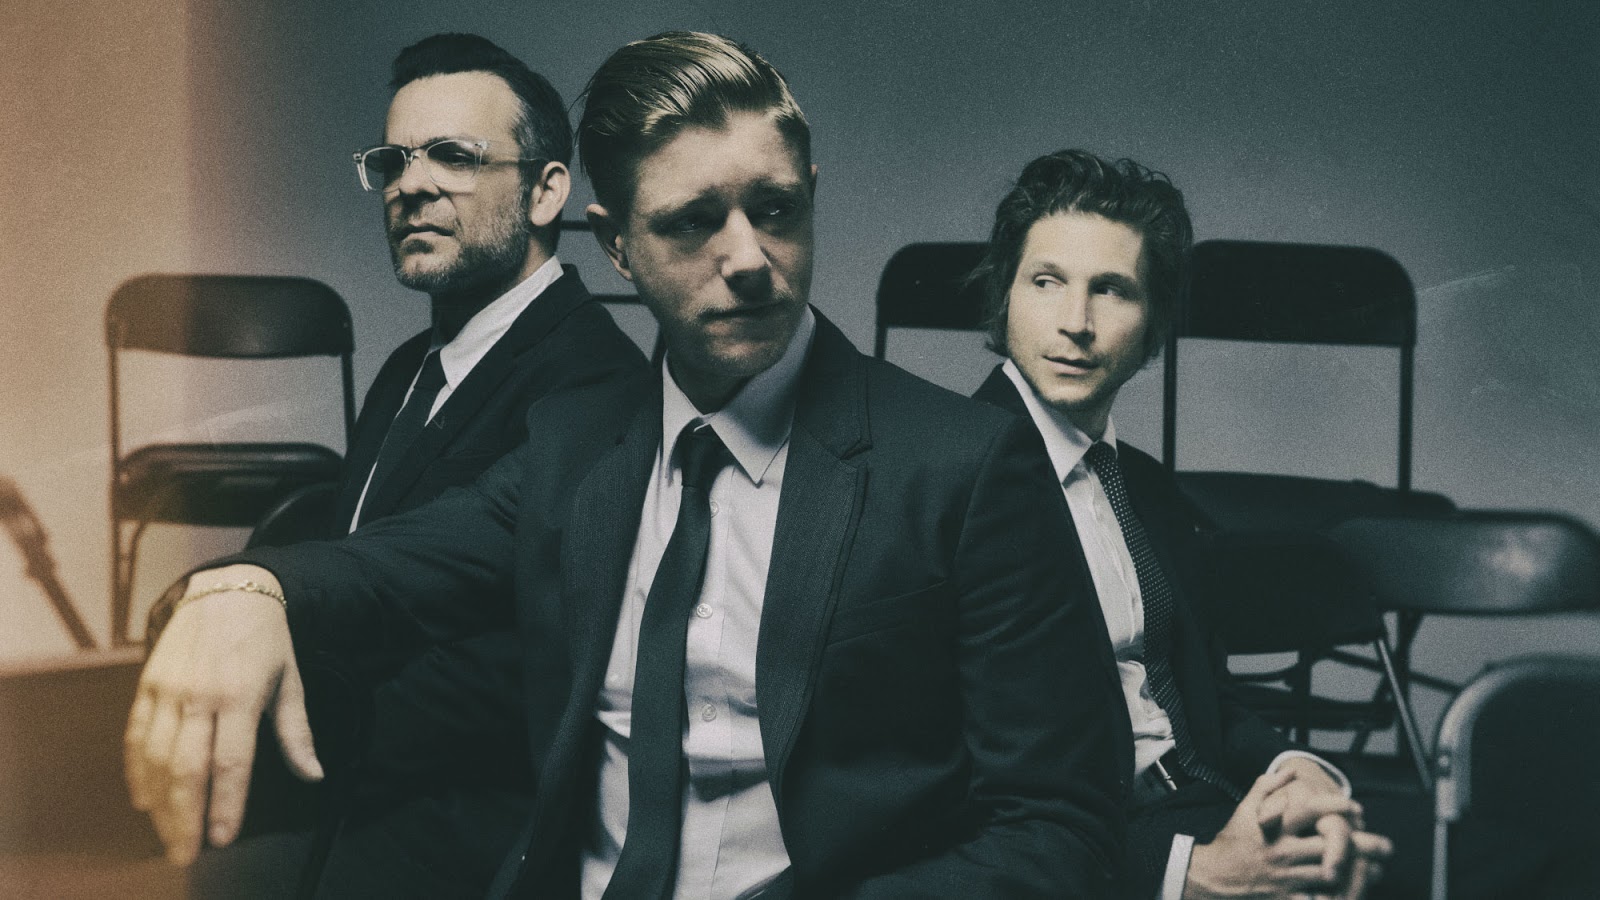 The Punk Rock Polygamist's Music: NYC Fuzz: The Music and New Album of Interpol